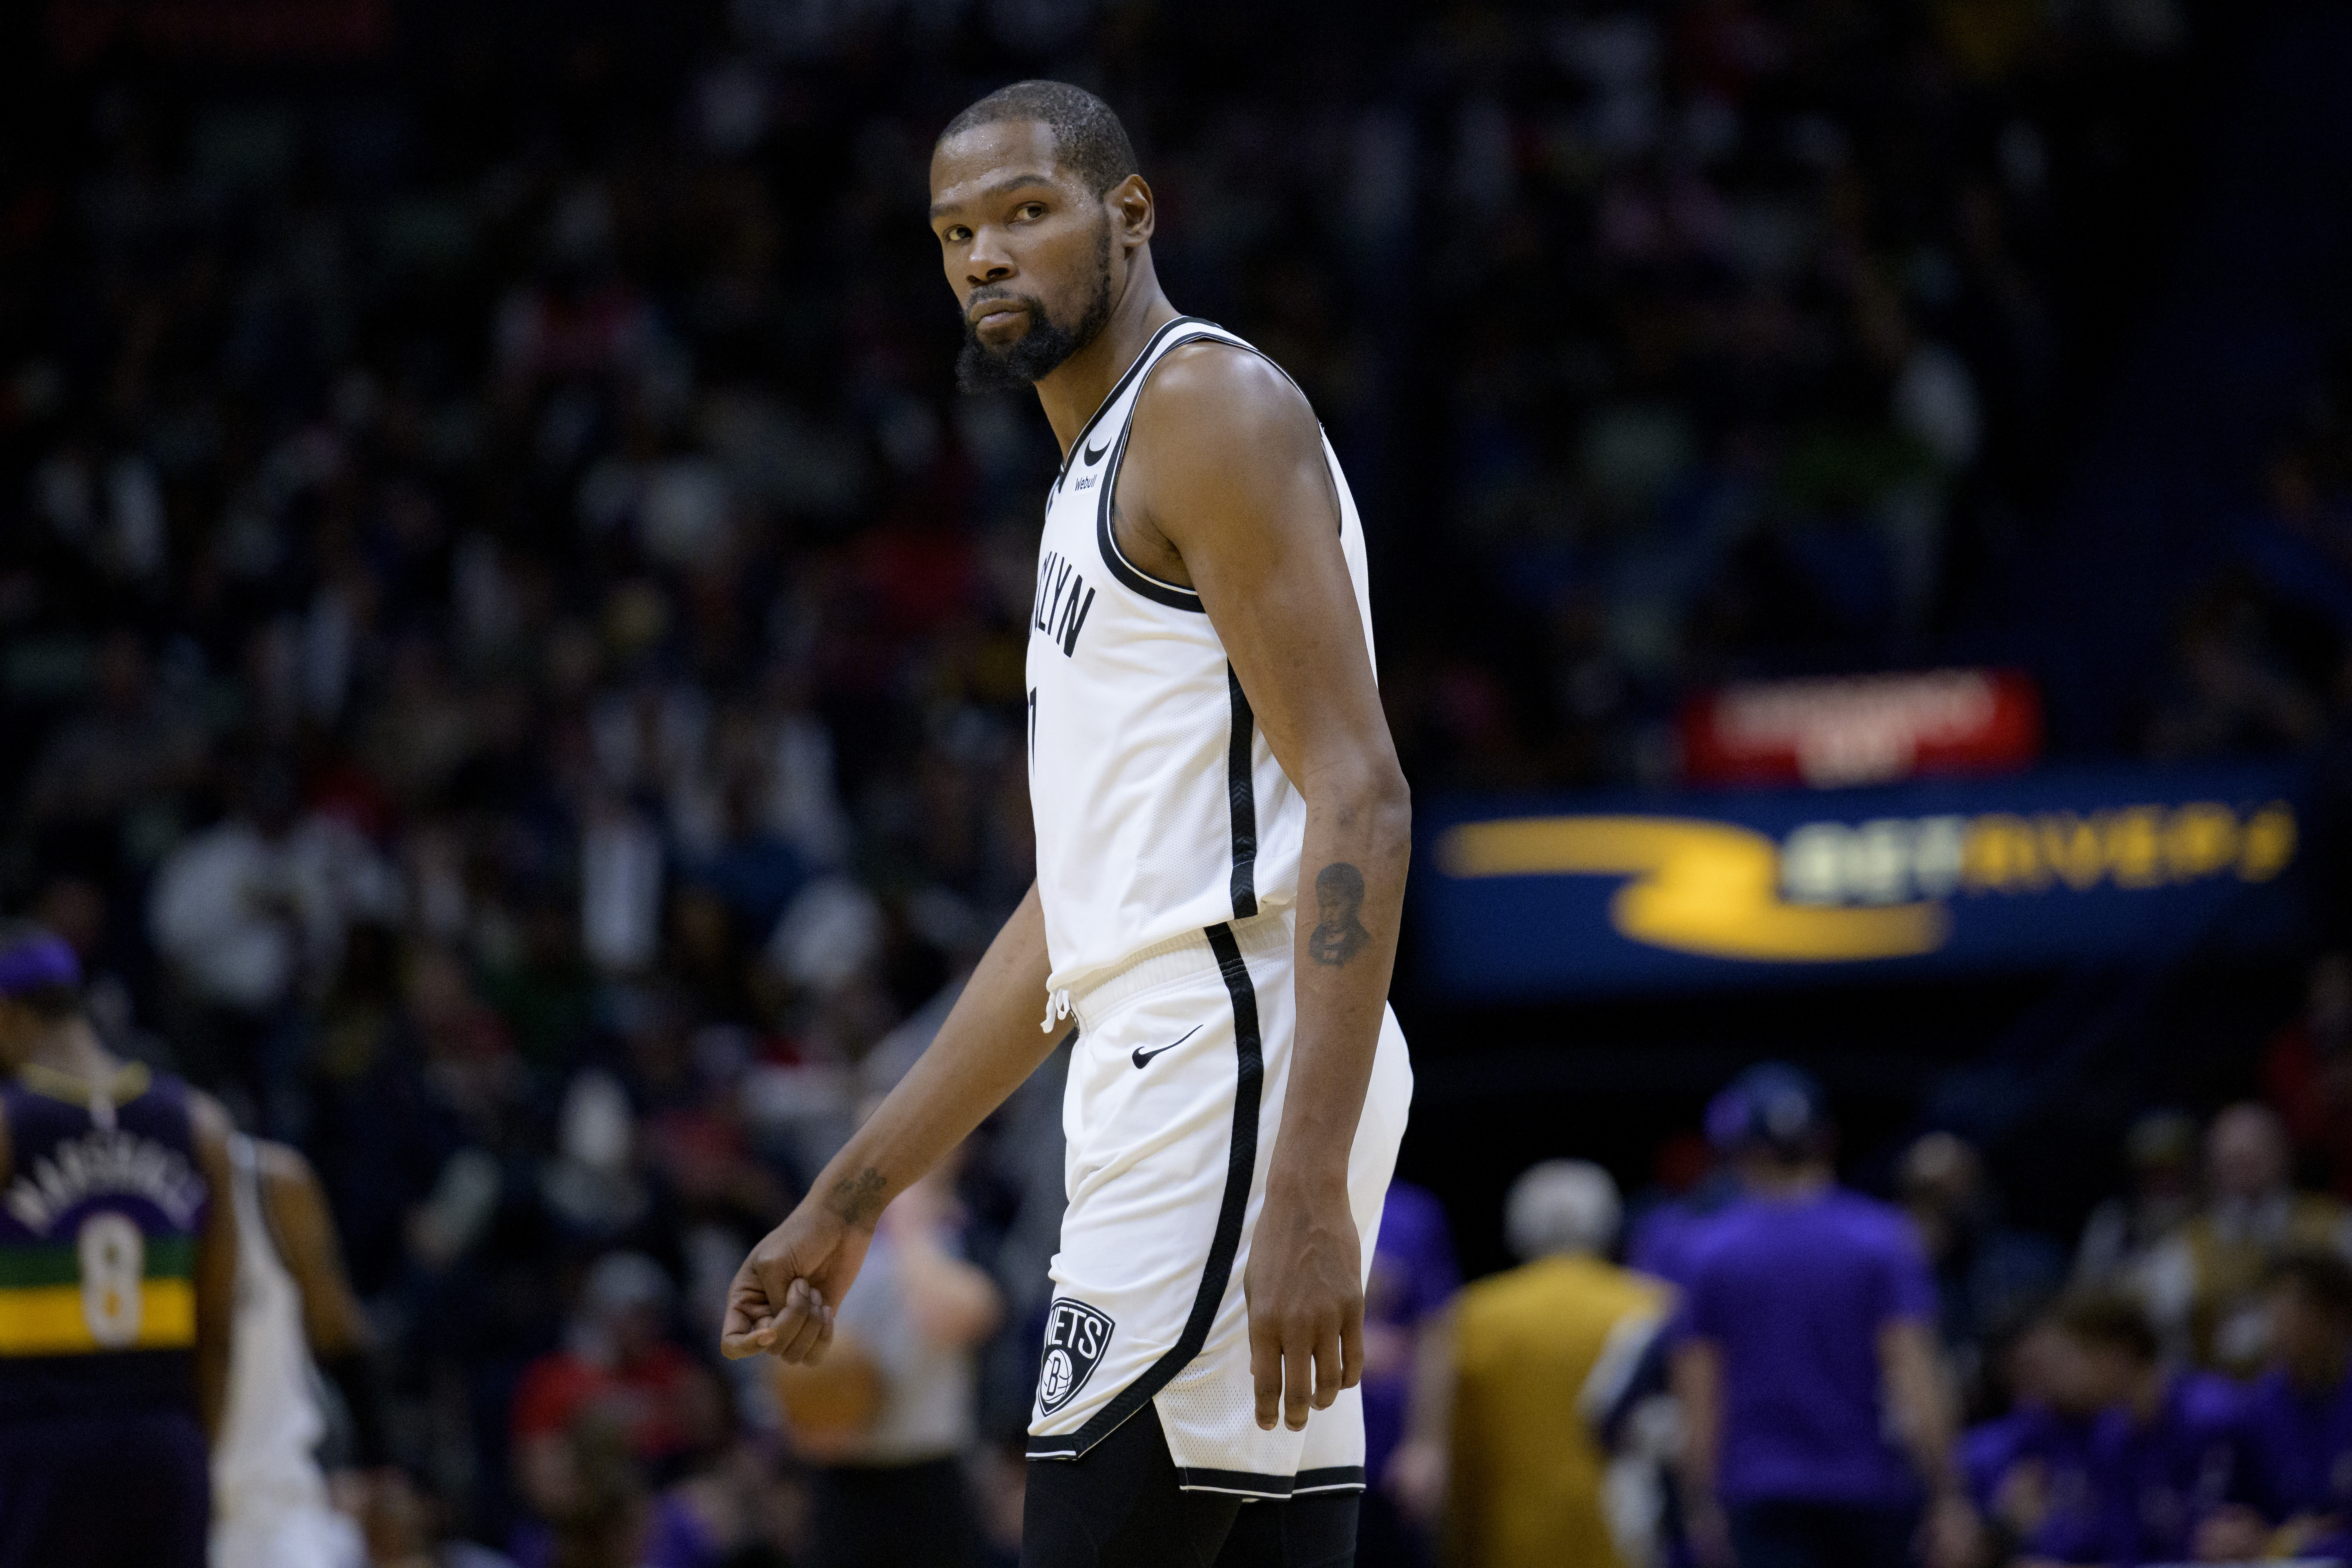 Brooklyn Nets trading Kevin Durant to Phoenix Suns